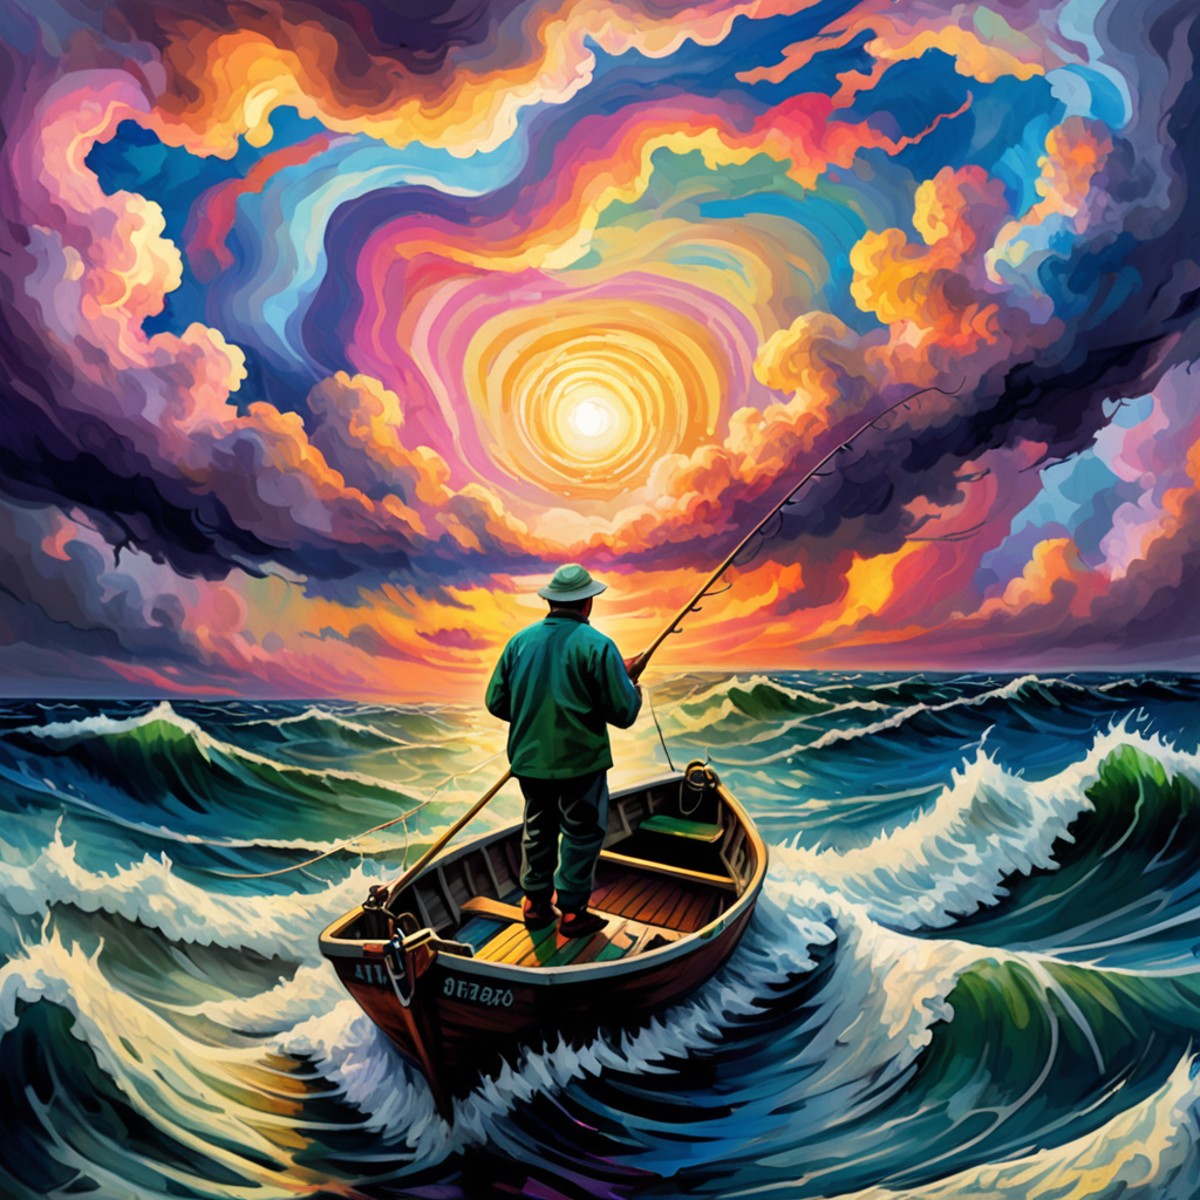 an impressionistic artwork LSD Trip an fisherman on open see in a stormy sea ,colorful sky